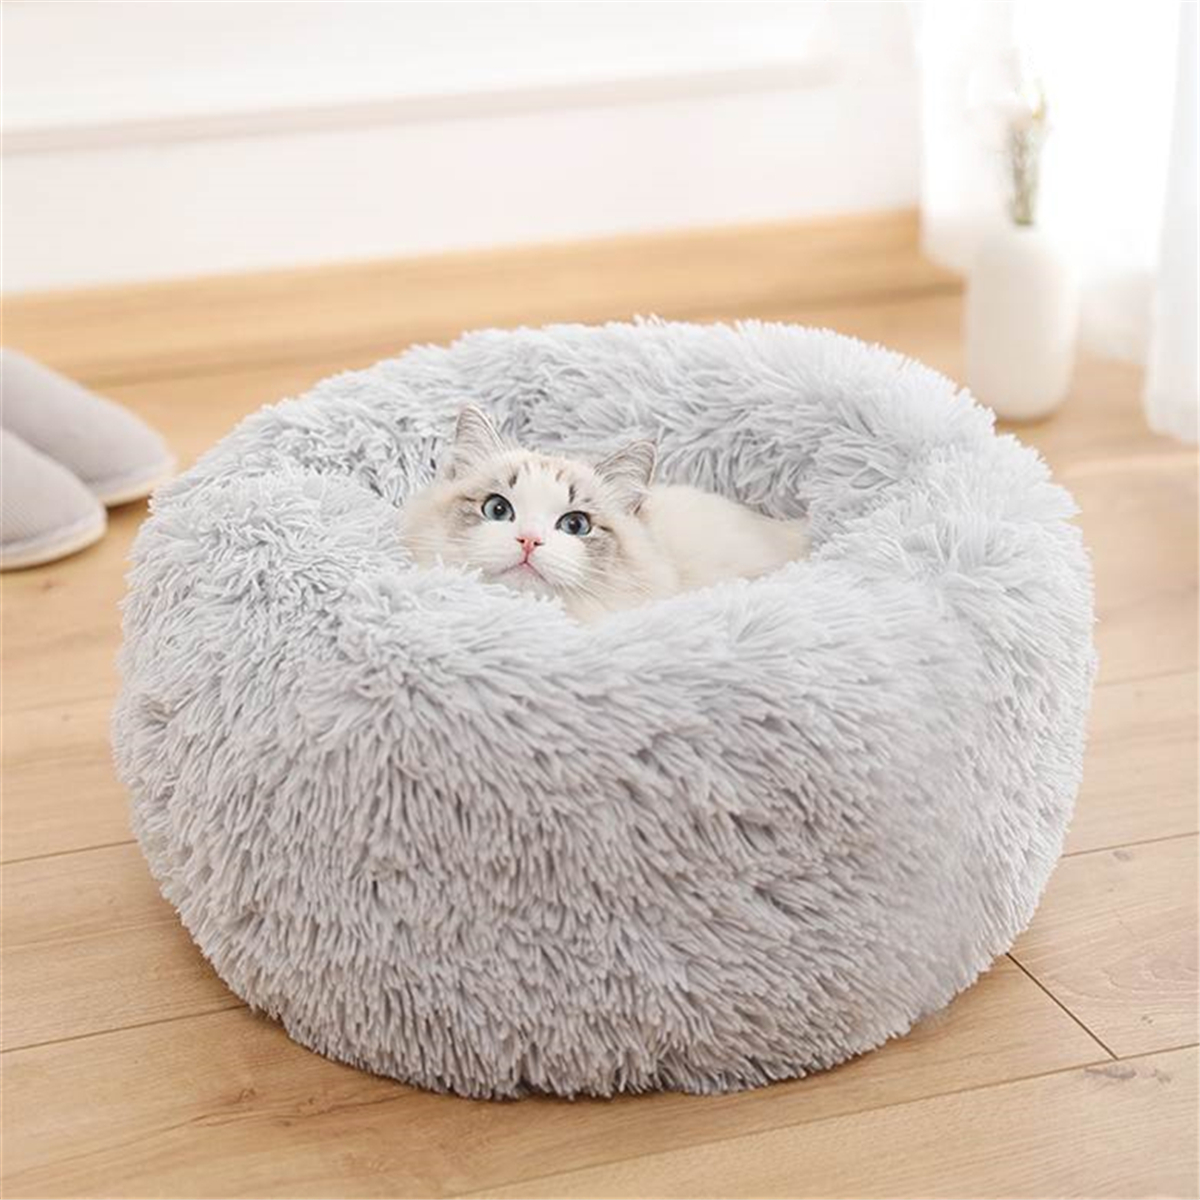 4-Size-Dog-Cat-Round-Bed-Sleeping-Bed-Plush-Pet-Bed-Kennel-Sleeping-Cushion-Puppy-1475650-6